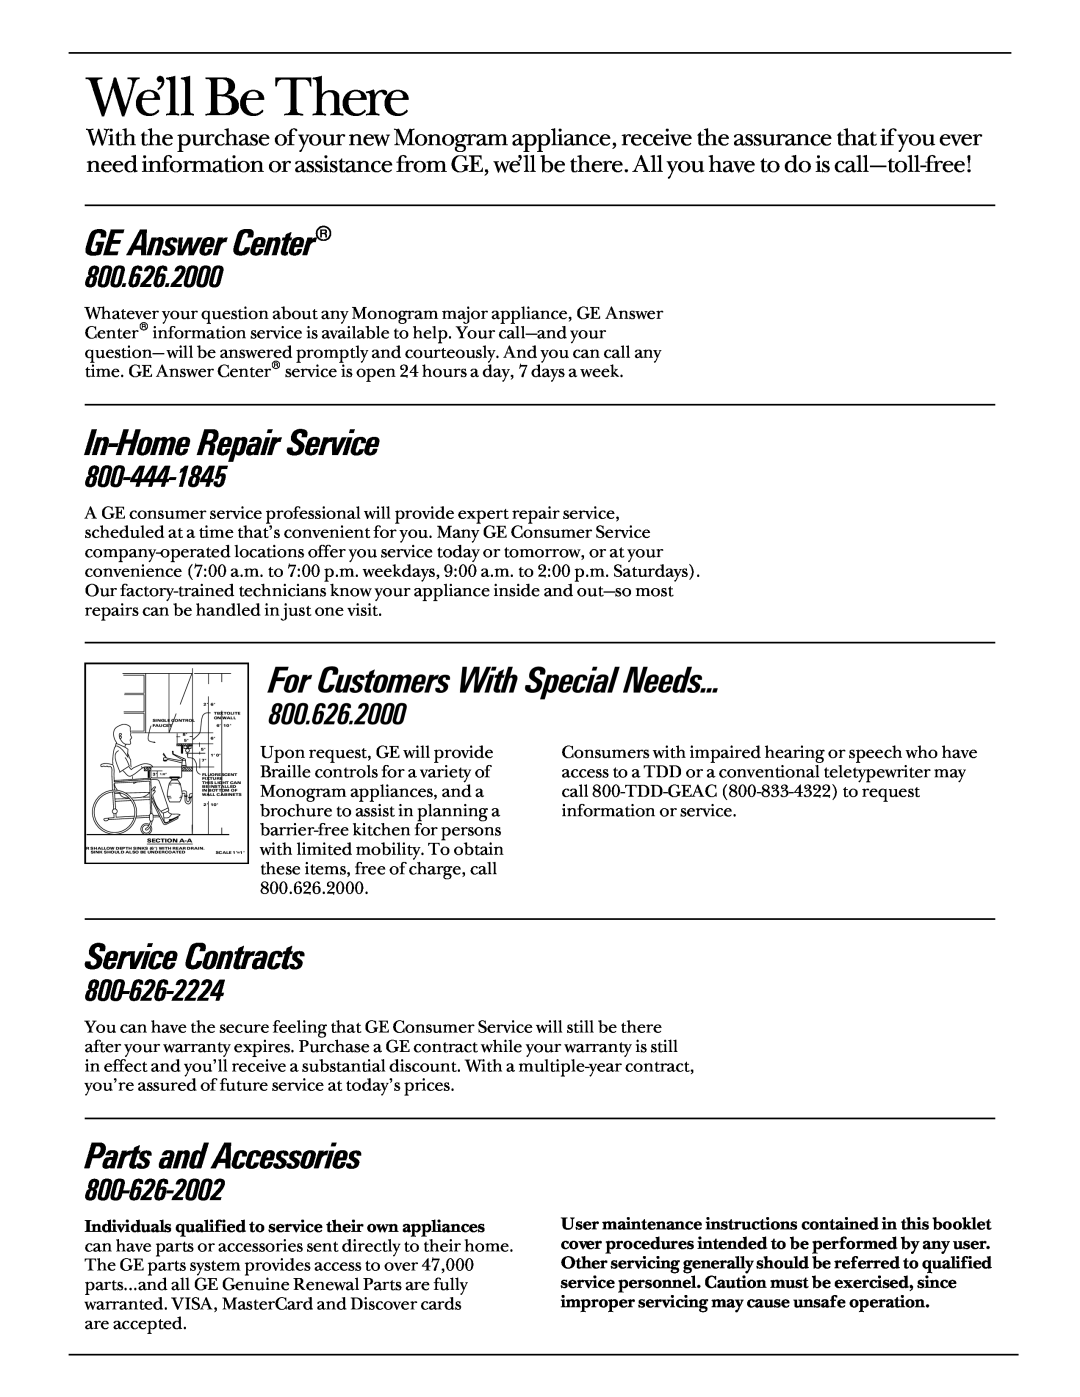 GE Monogram ZBD4700 manual We’ll Be There, GE Answer Center, In-HomeRepair Service, For Customers With Special Needs… 